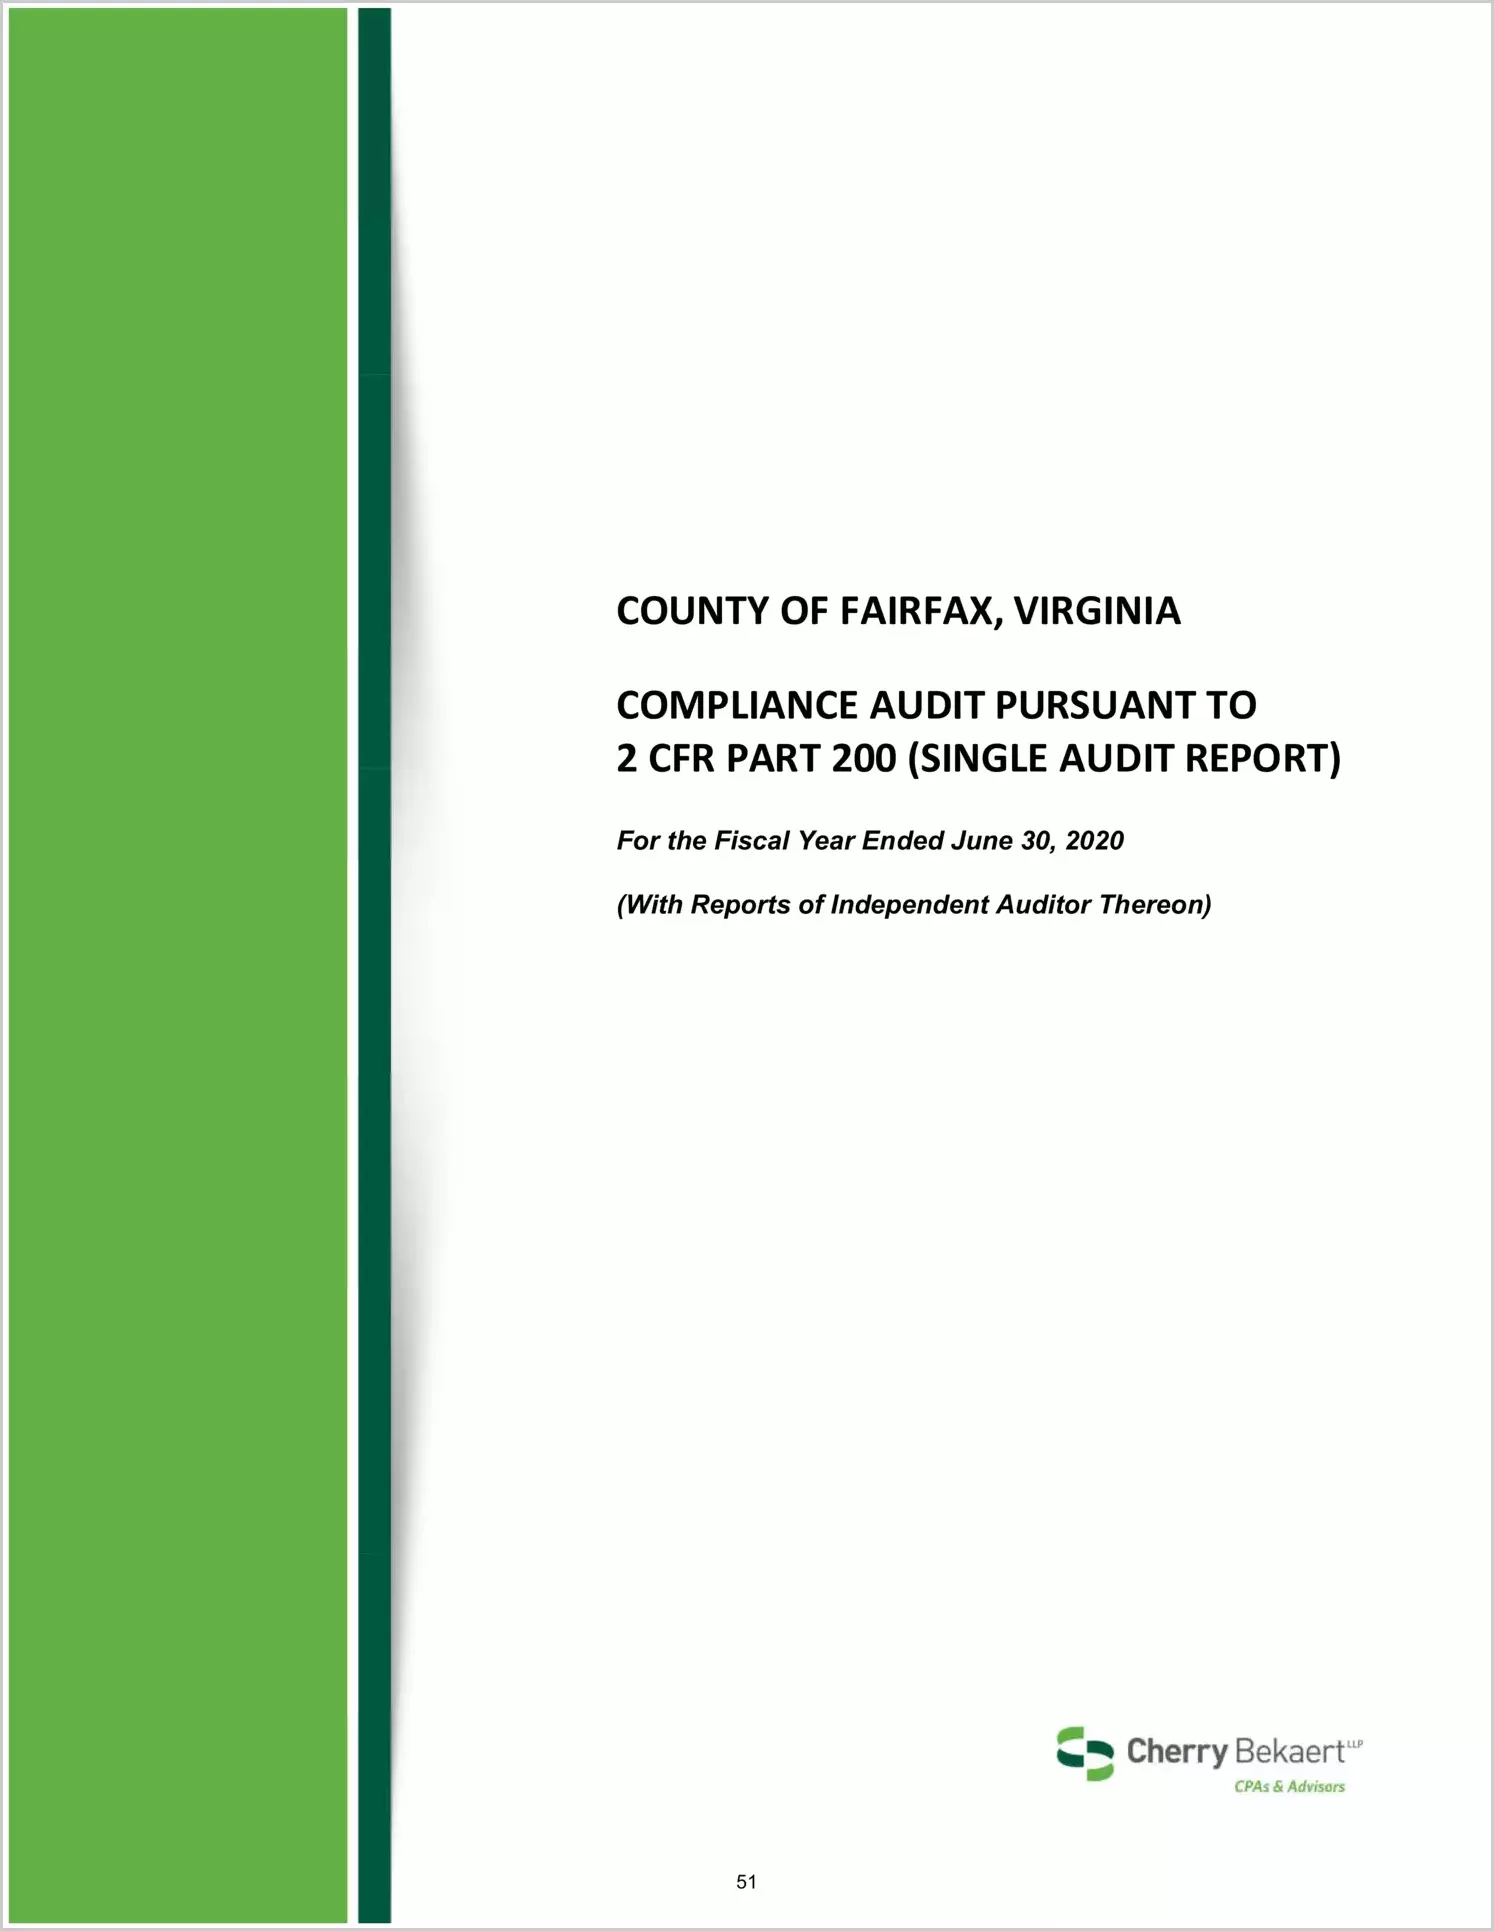 2020 Internal Control and Compliance Report for County of Fairfax